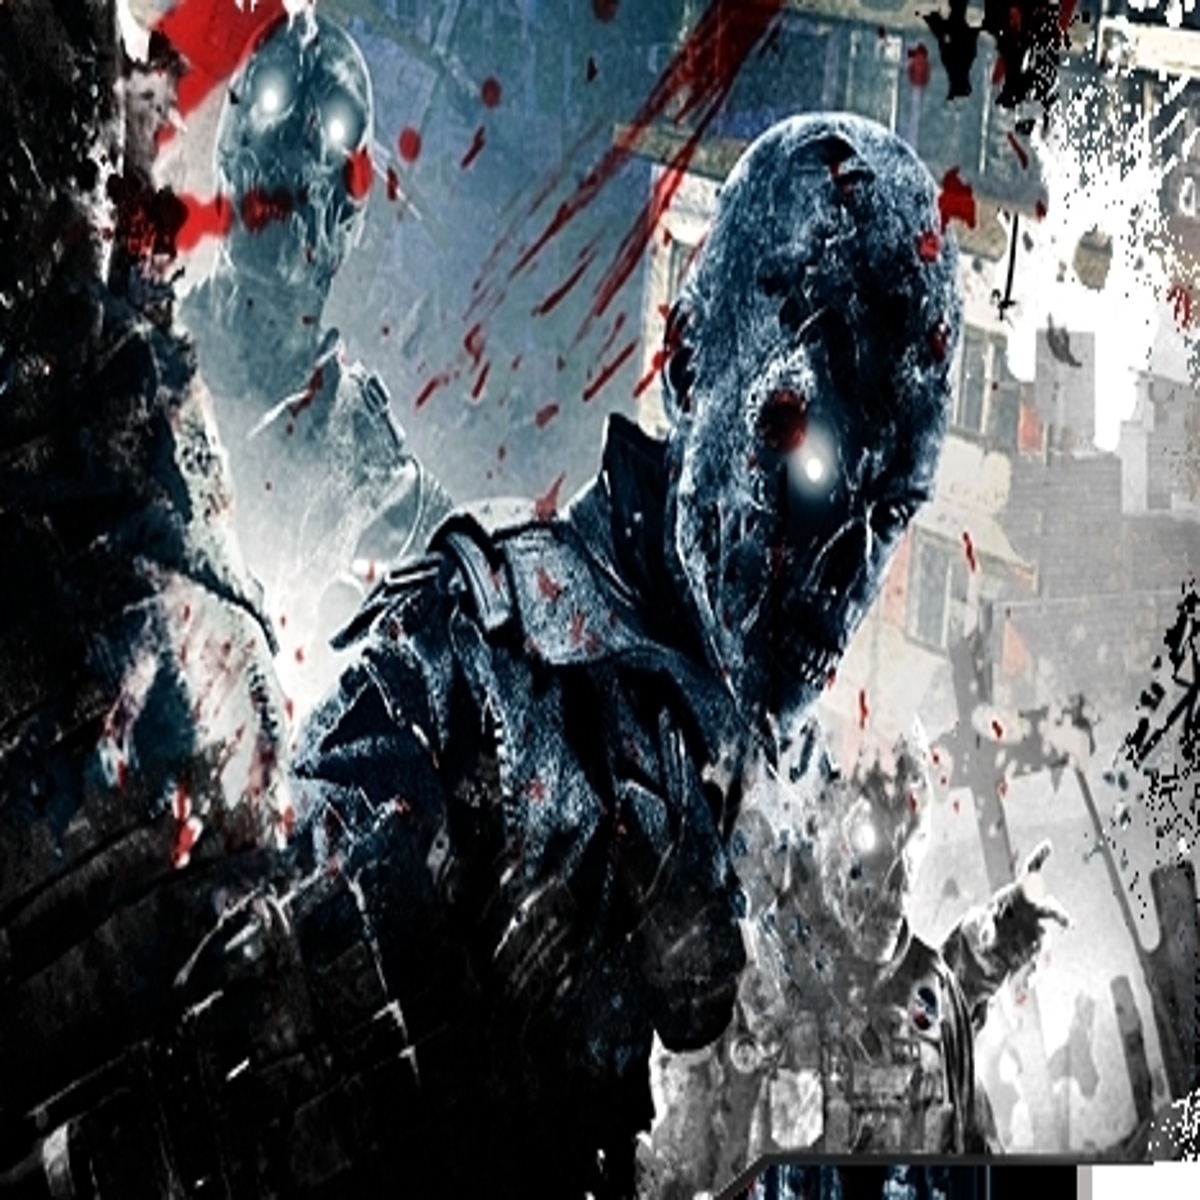 Hands-on with Black Ops 2's Revolution DLC: Zombie high rises and